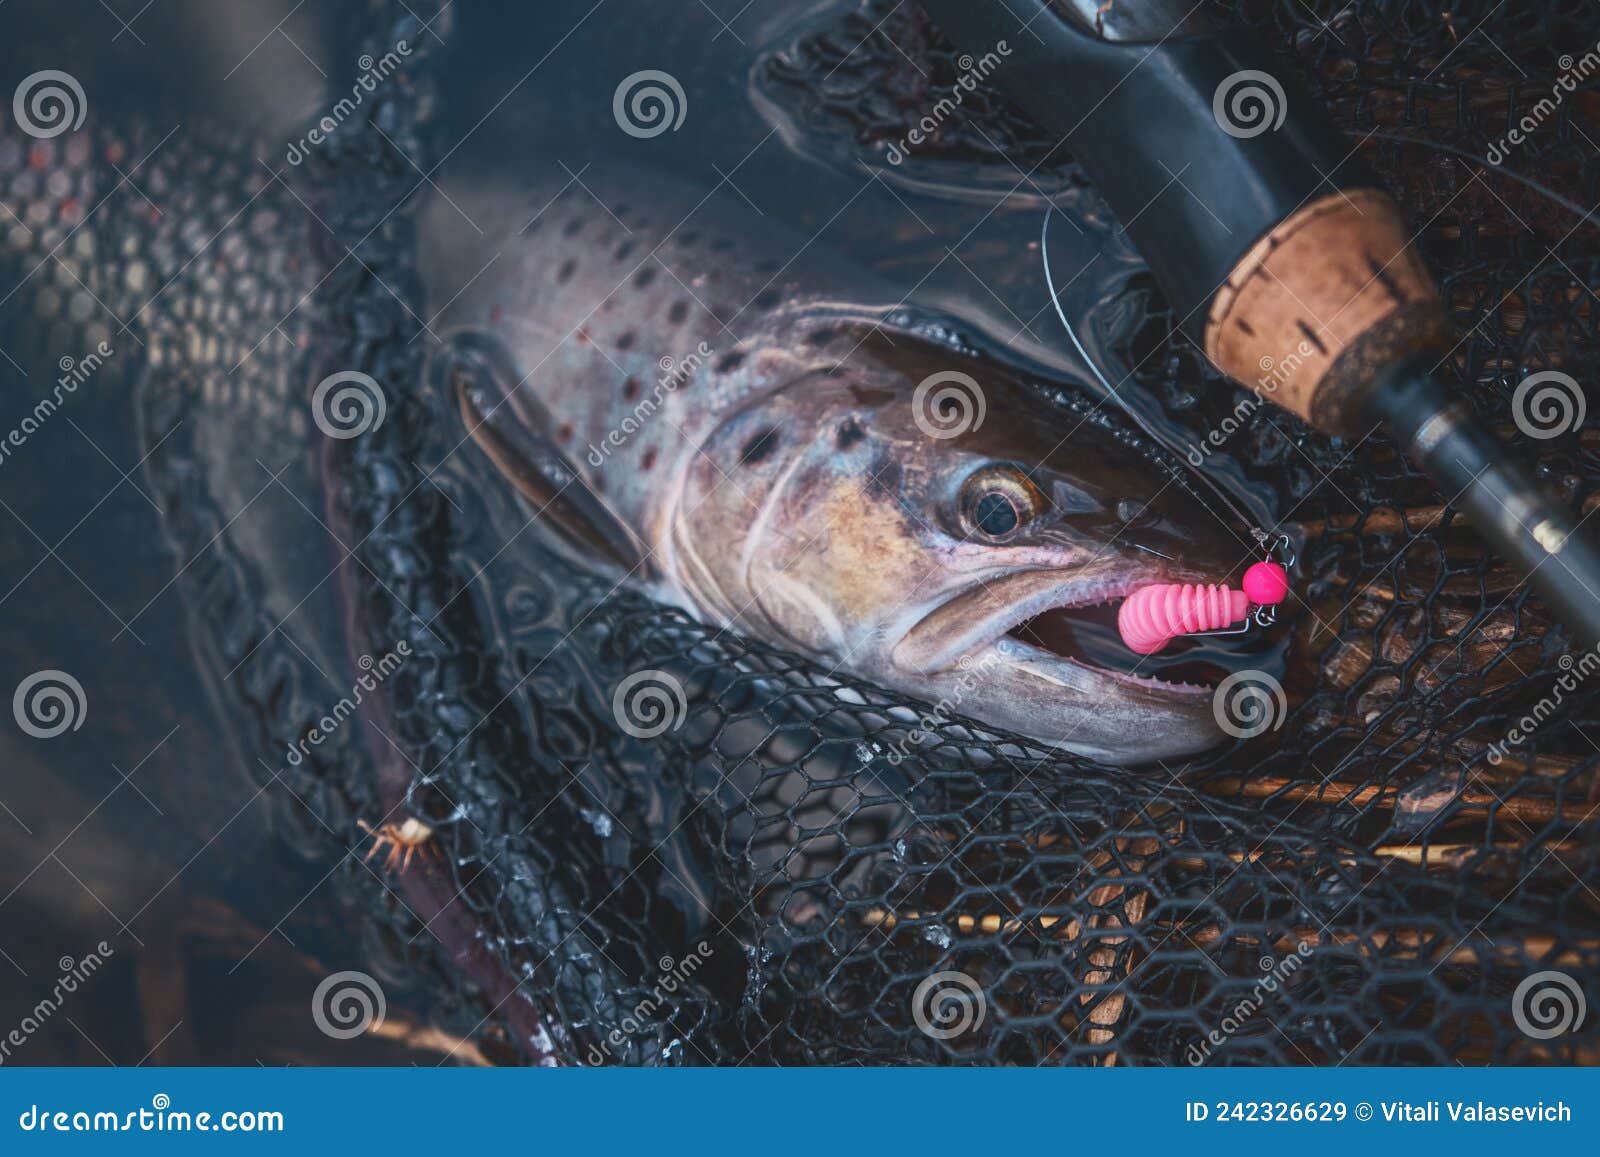 Trout Caught on Soft Plastic Bait Stock Image - Image of angler, river:  242326629